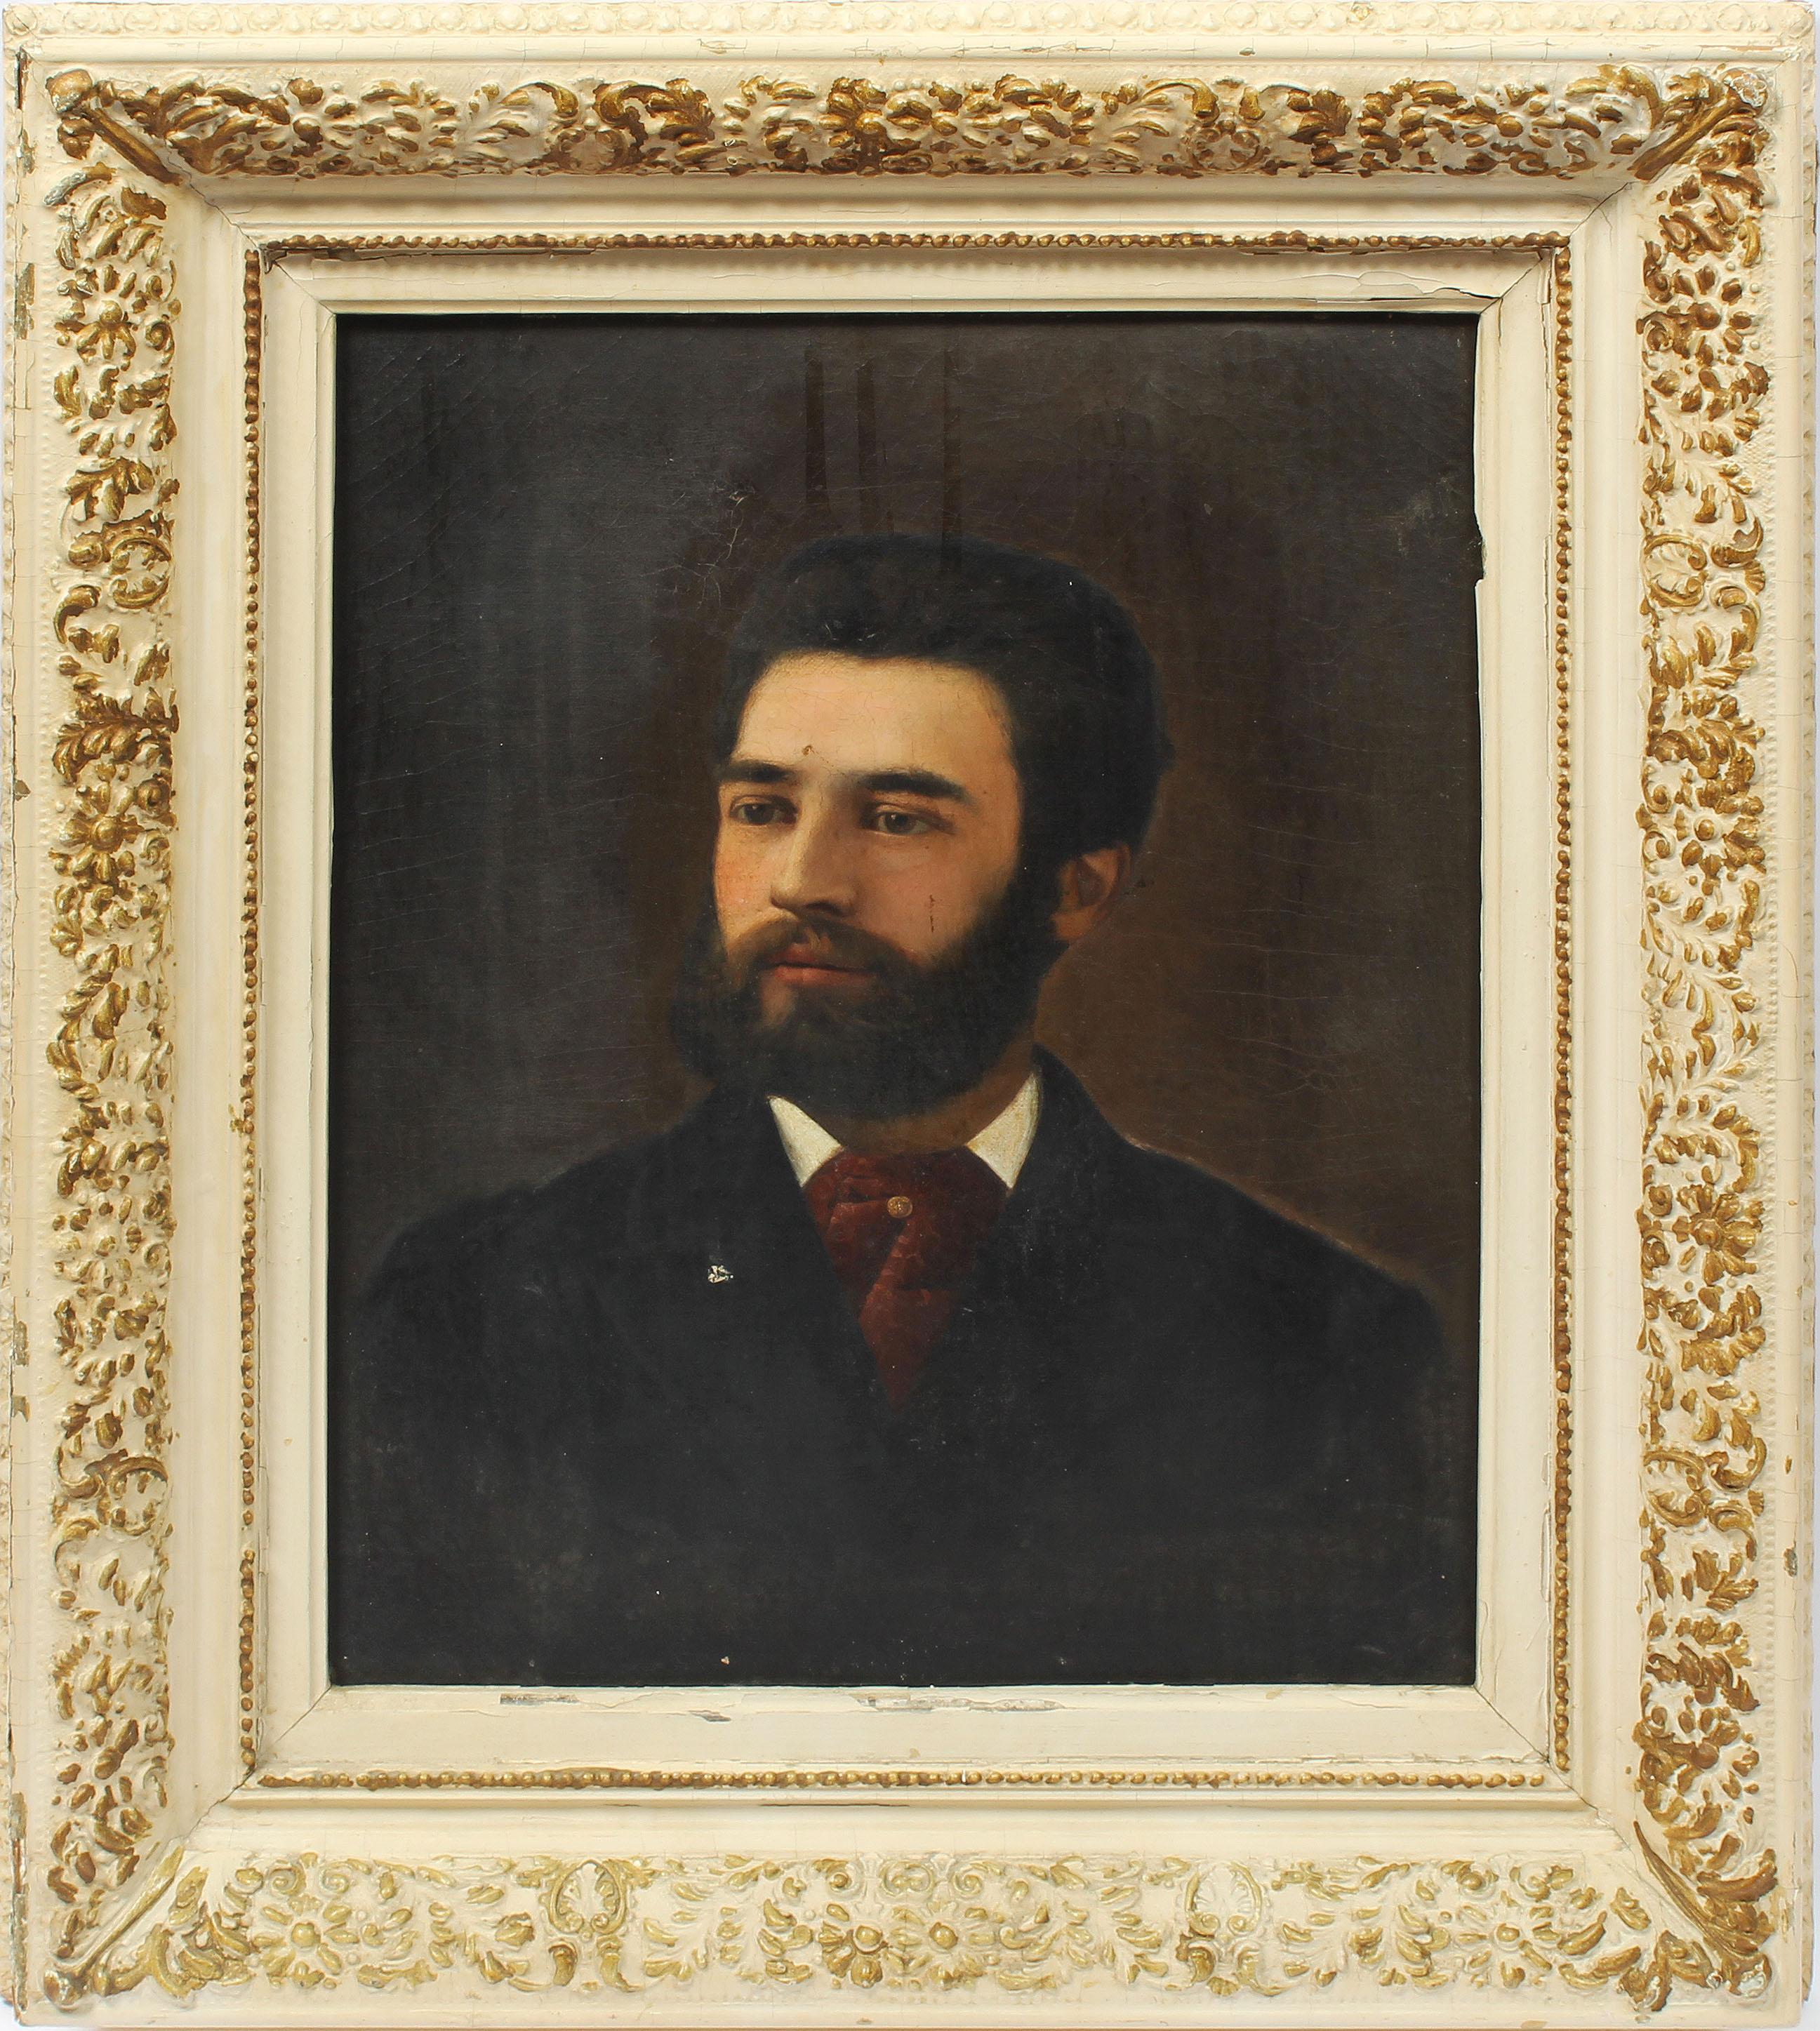 Unknown Portrait Painting - Antique American Original Oil Painting Male Portrait of a Young Handsome Man